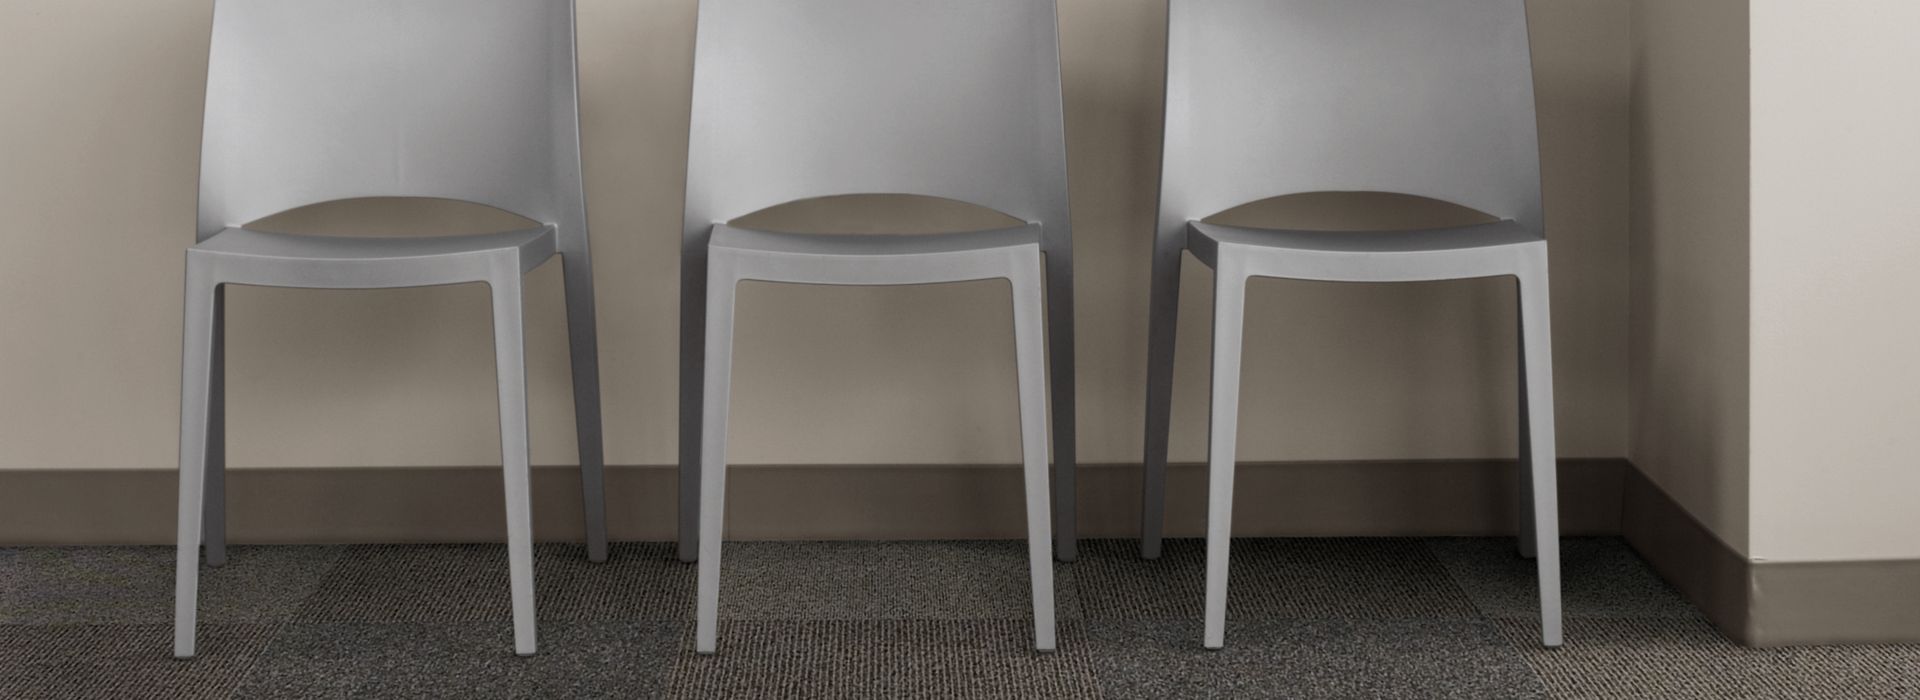 Interface Broomed, Grooved and Brushed carpet tile in room with three chairs